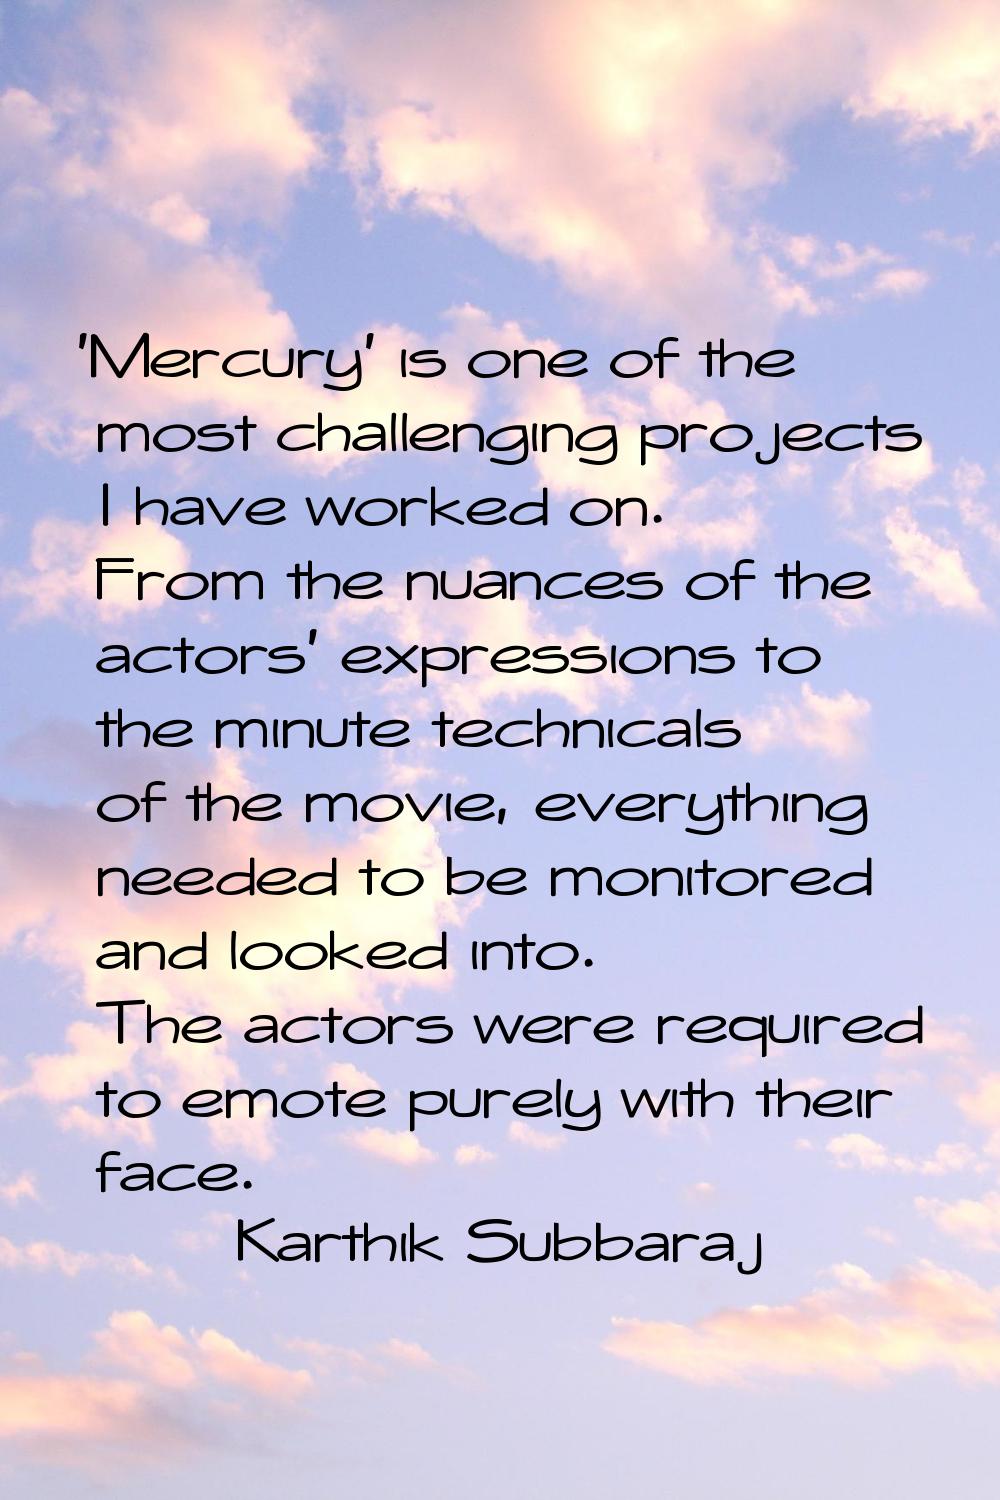 'Mercury' is one of the most challenging projects I have worked on. From the nuances of the actors'